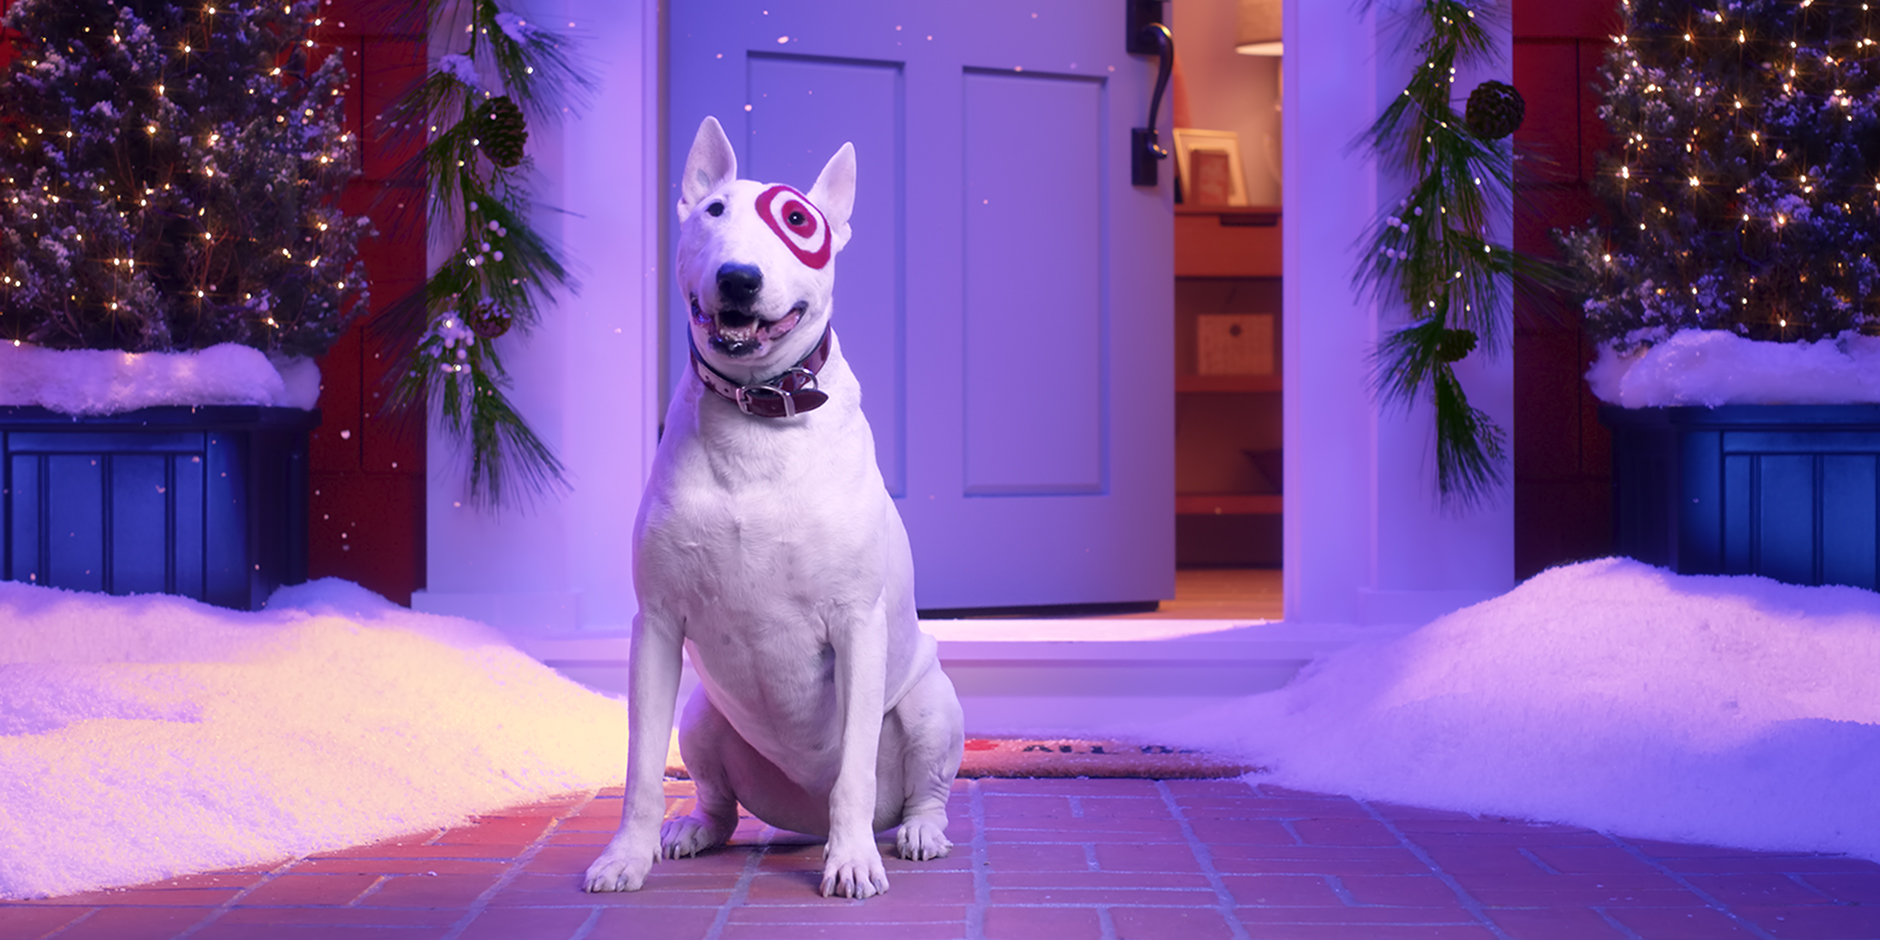 a white dog sitting on a pink carpet in front of a house